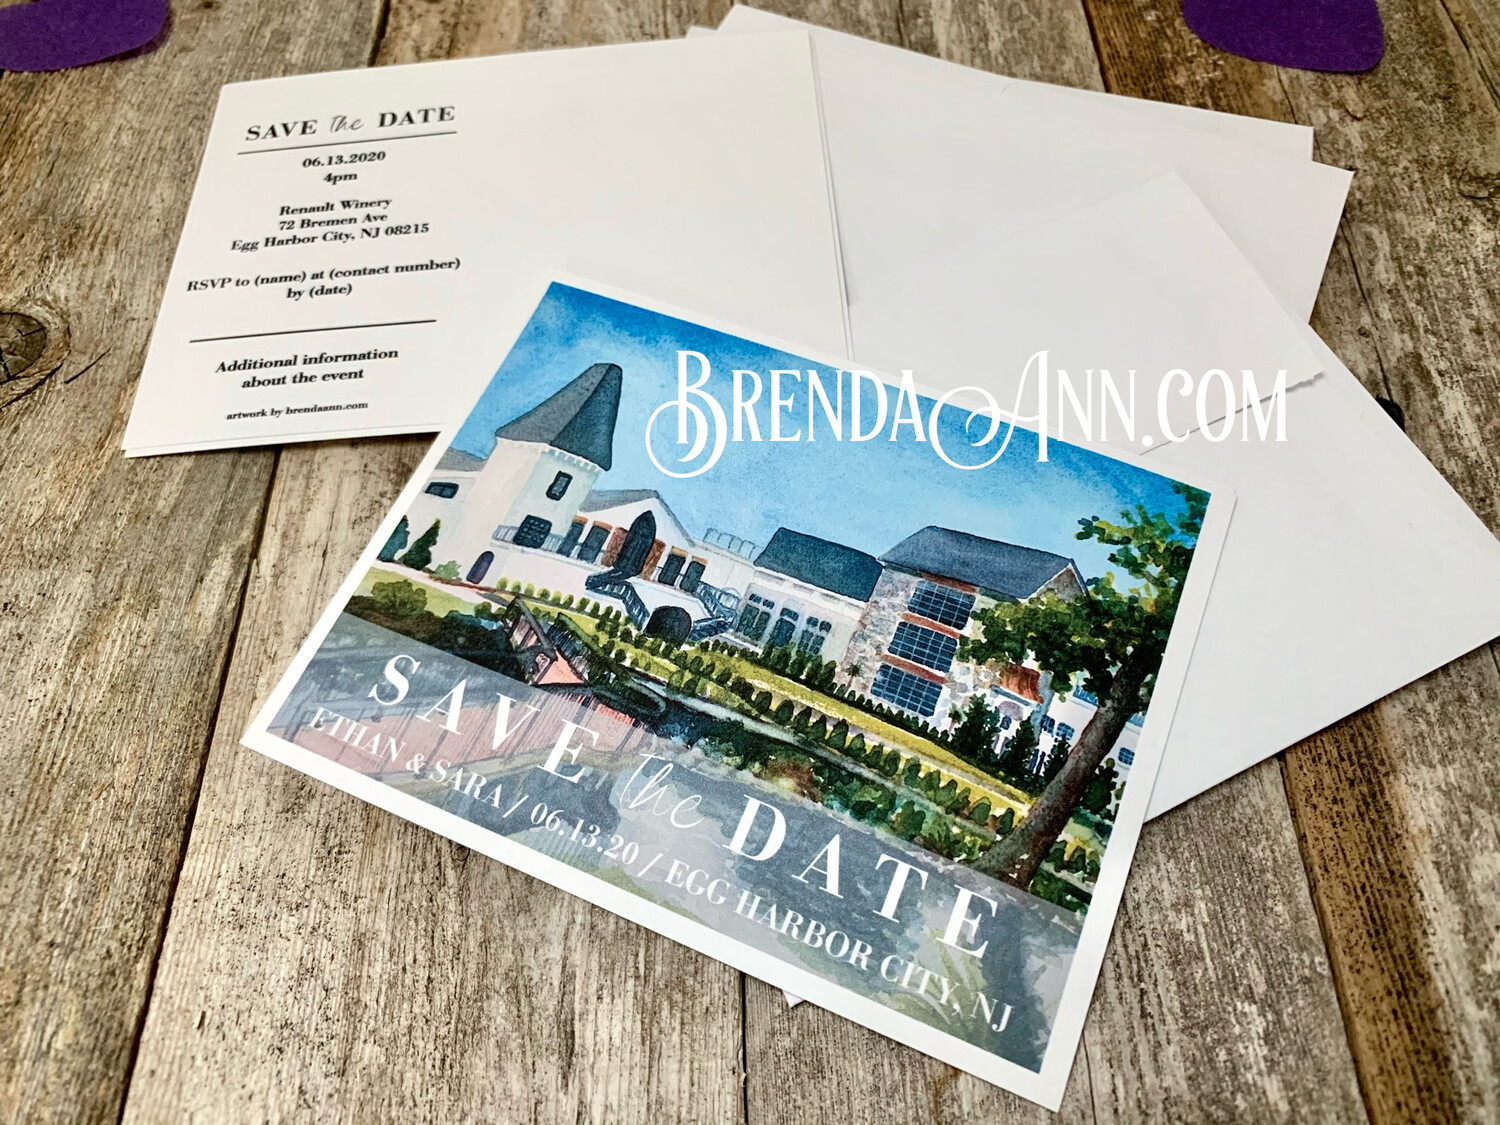 Renault Winery Wedding Save the Date Cards